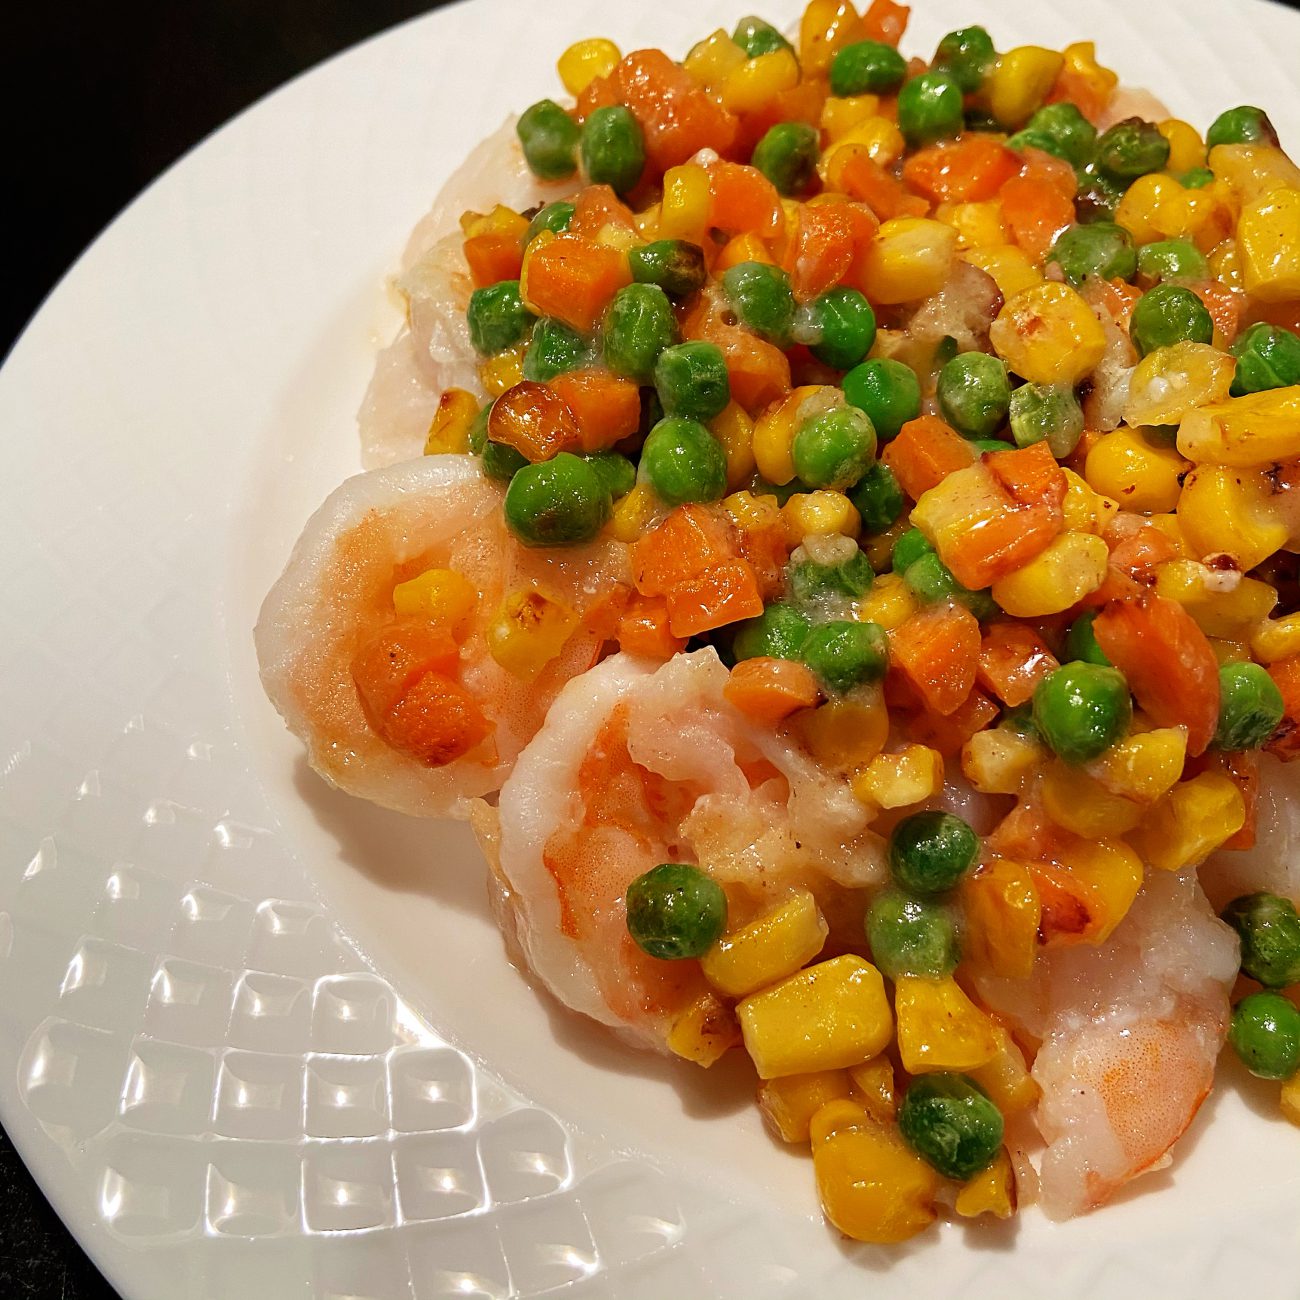 Mixed Shrimp with Vegetables